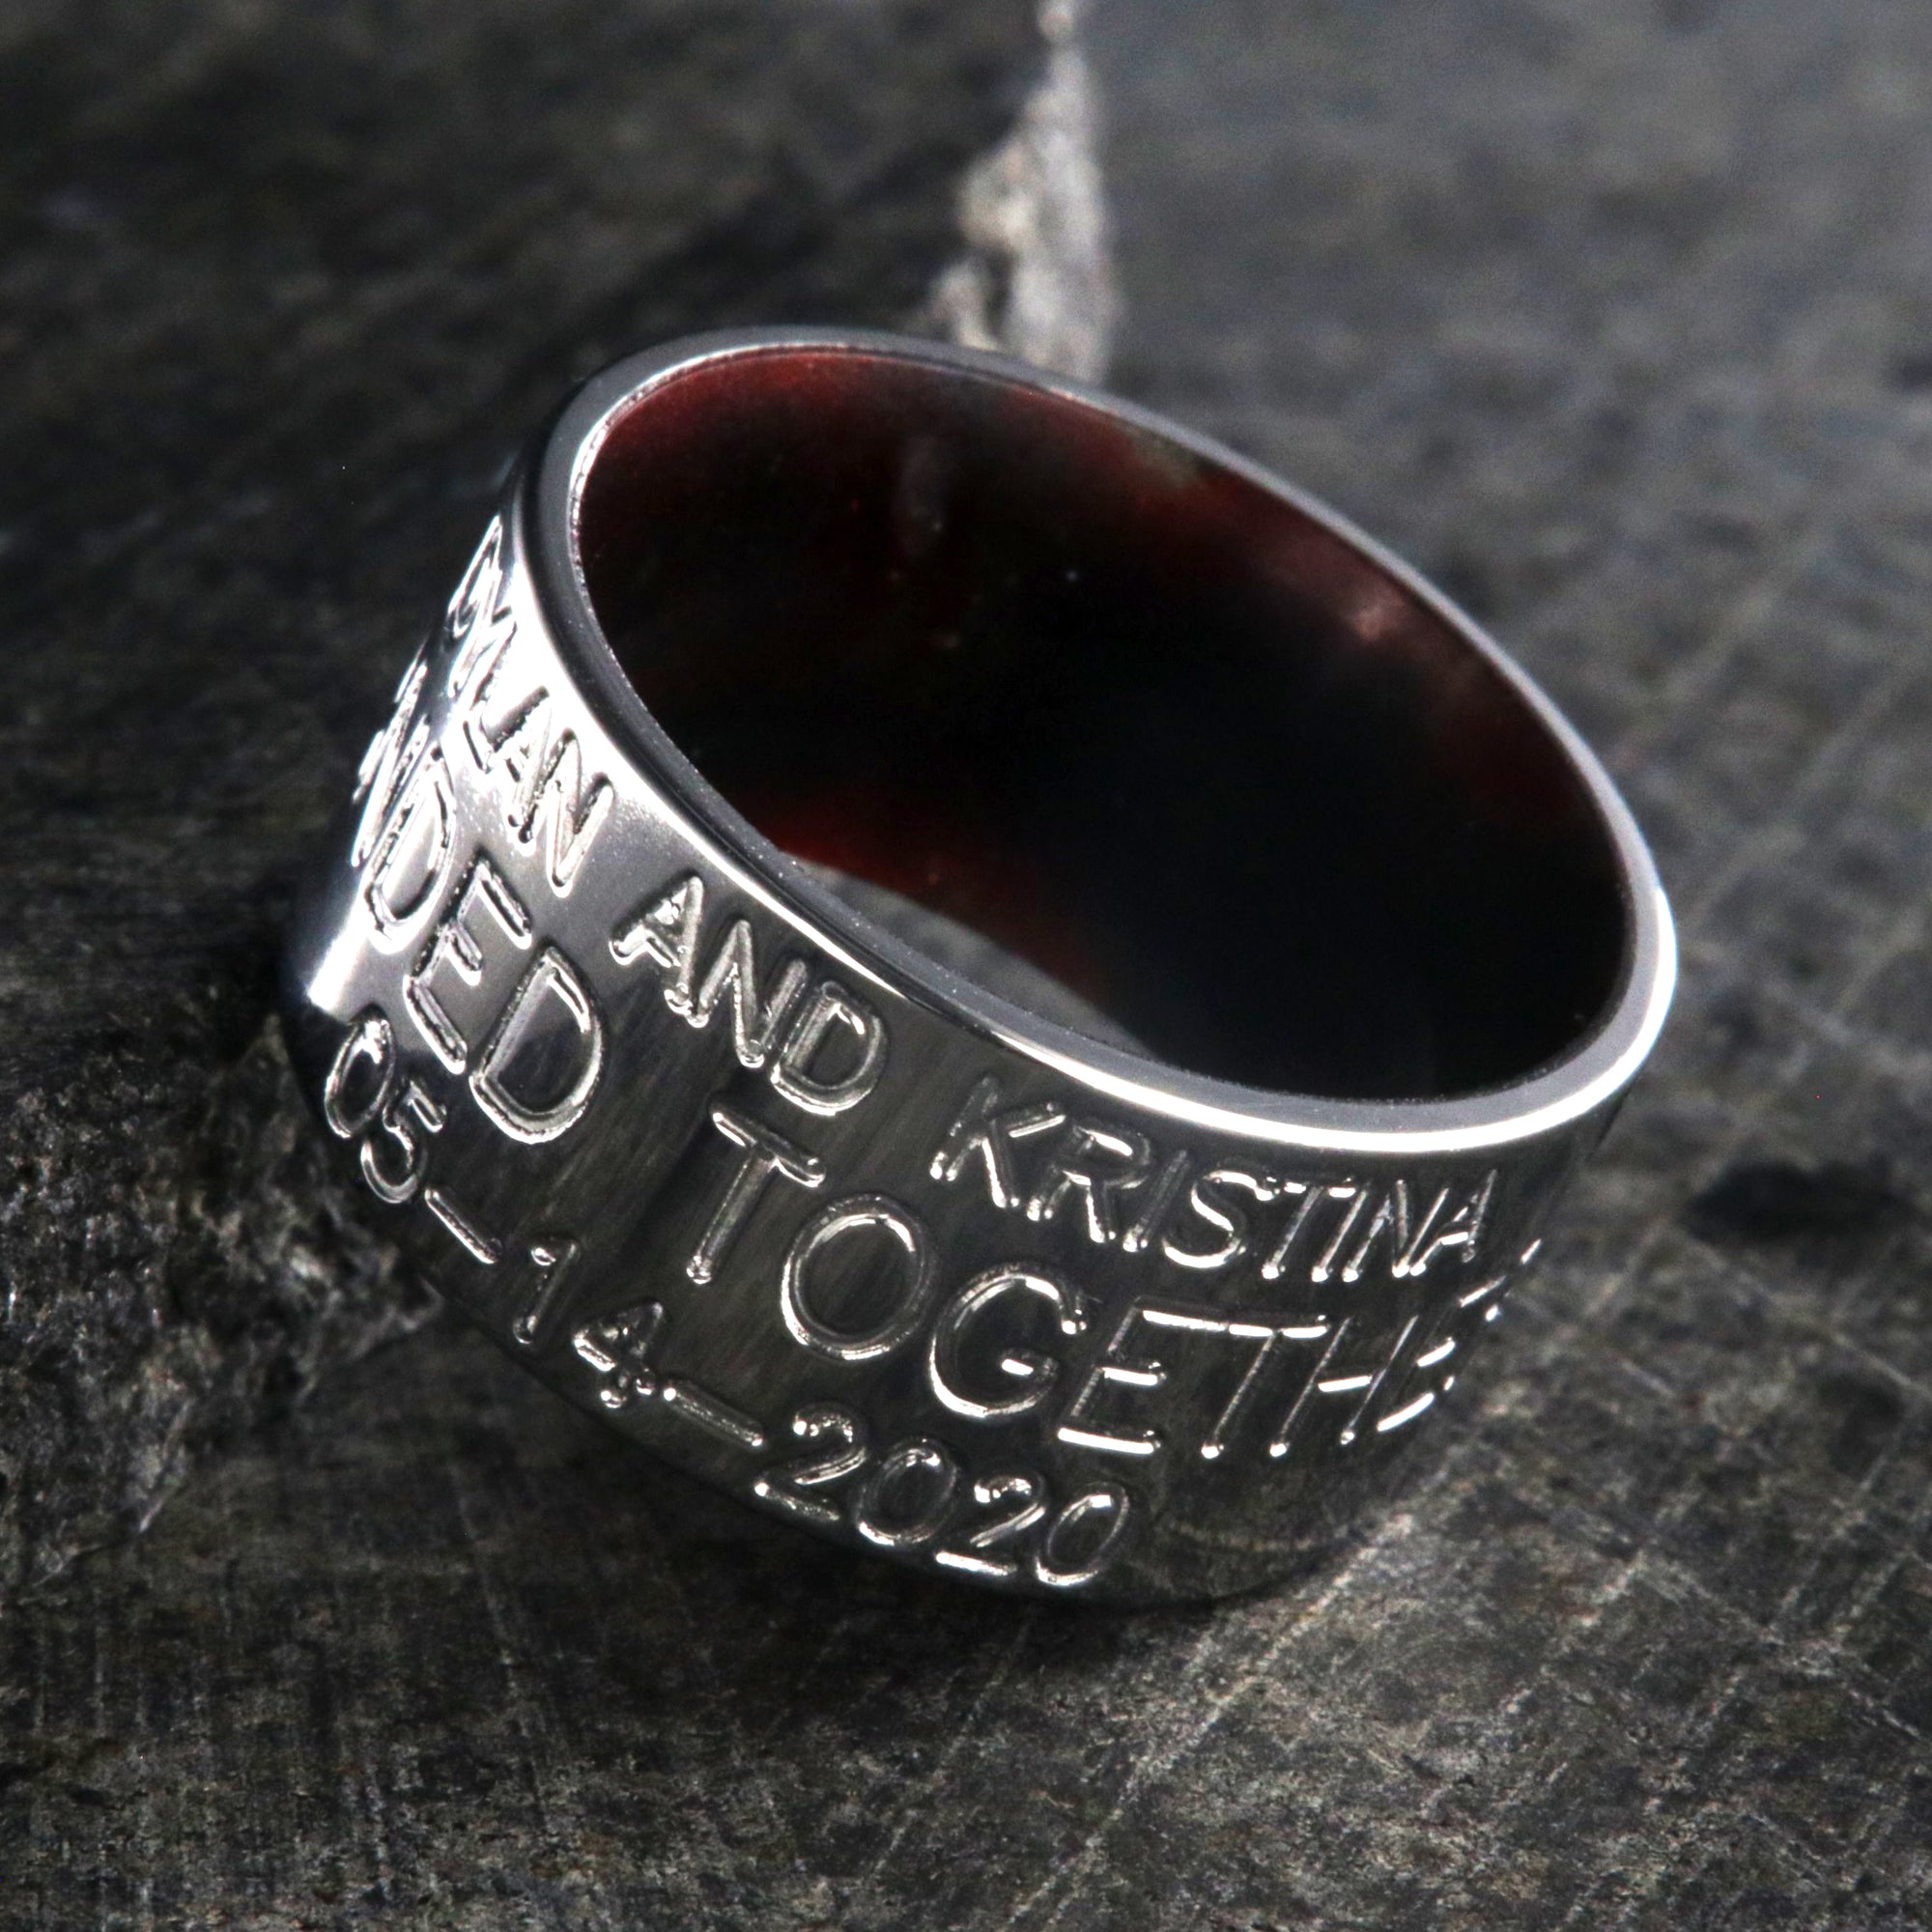 12mm wide titanium duck band ring with 3 lines of text with a dark red sleeve